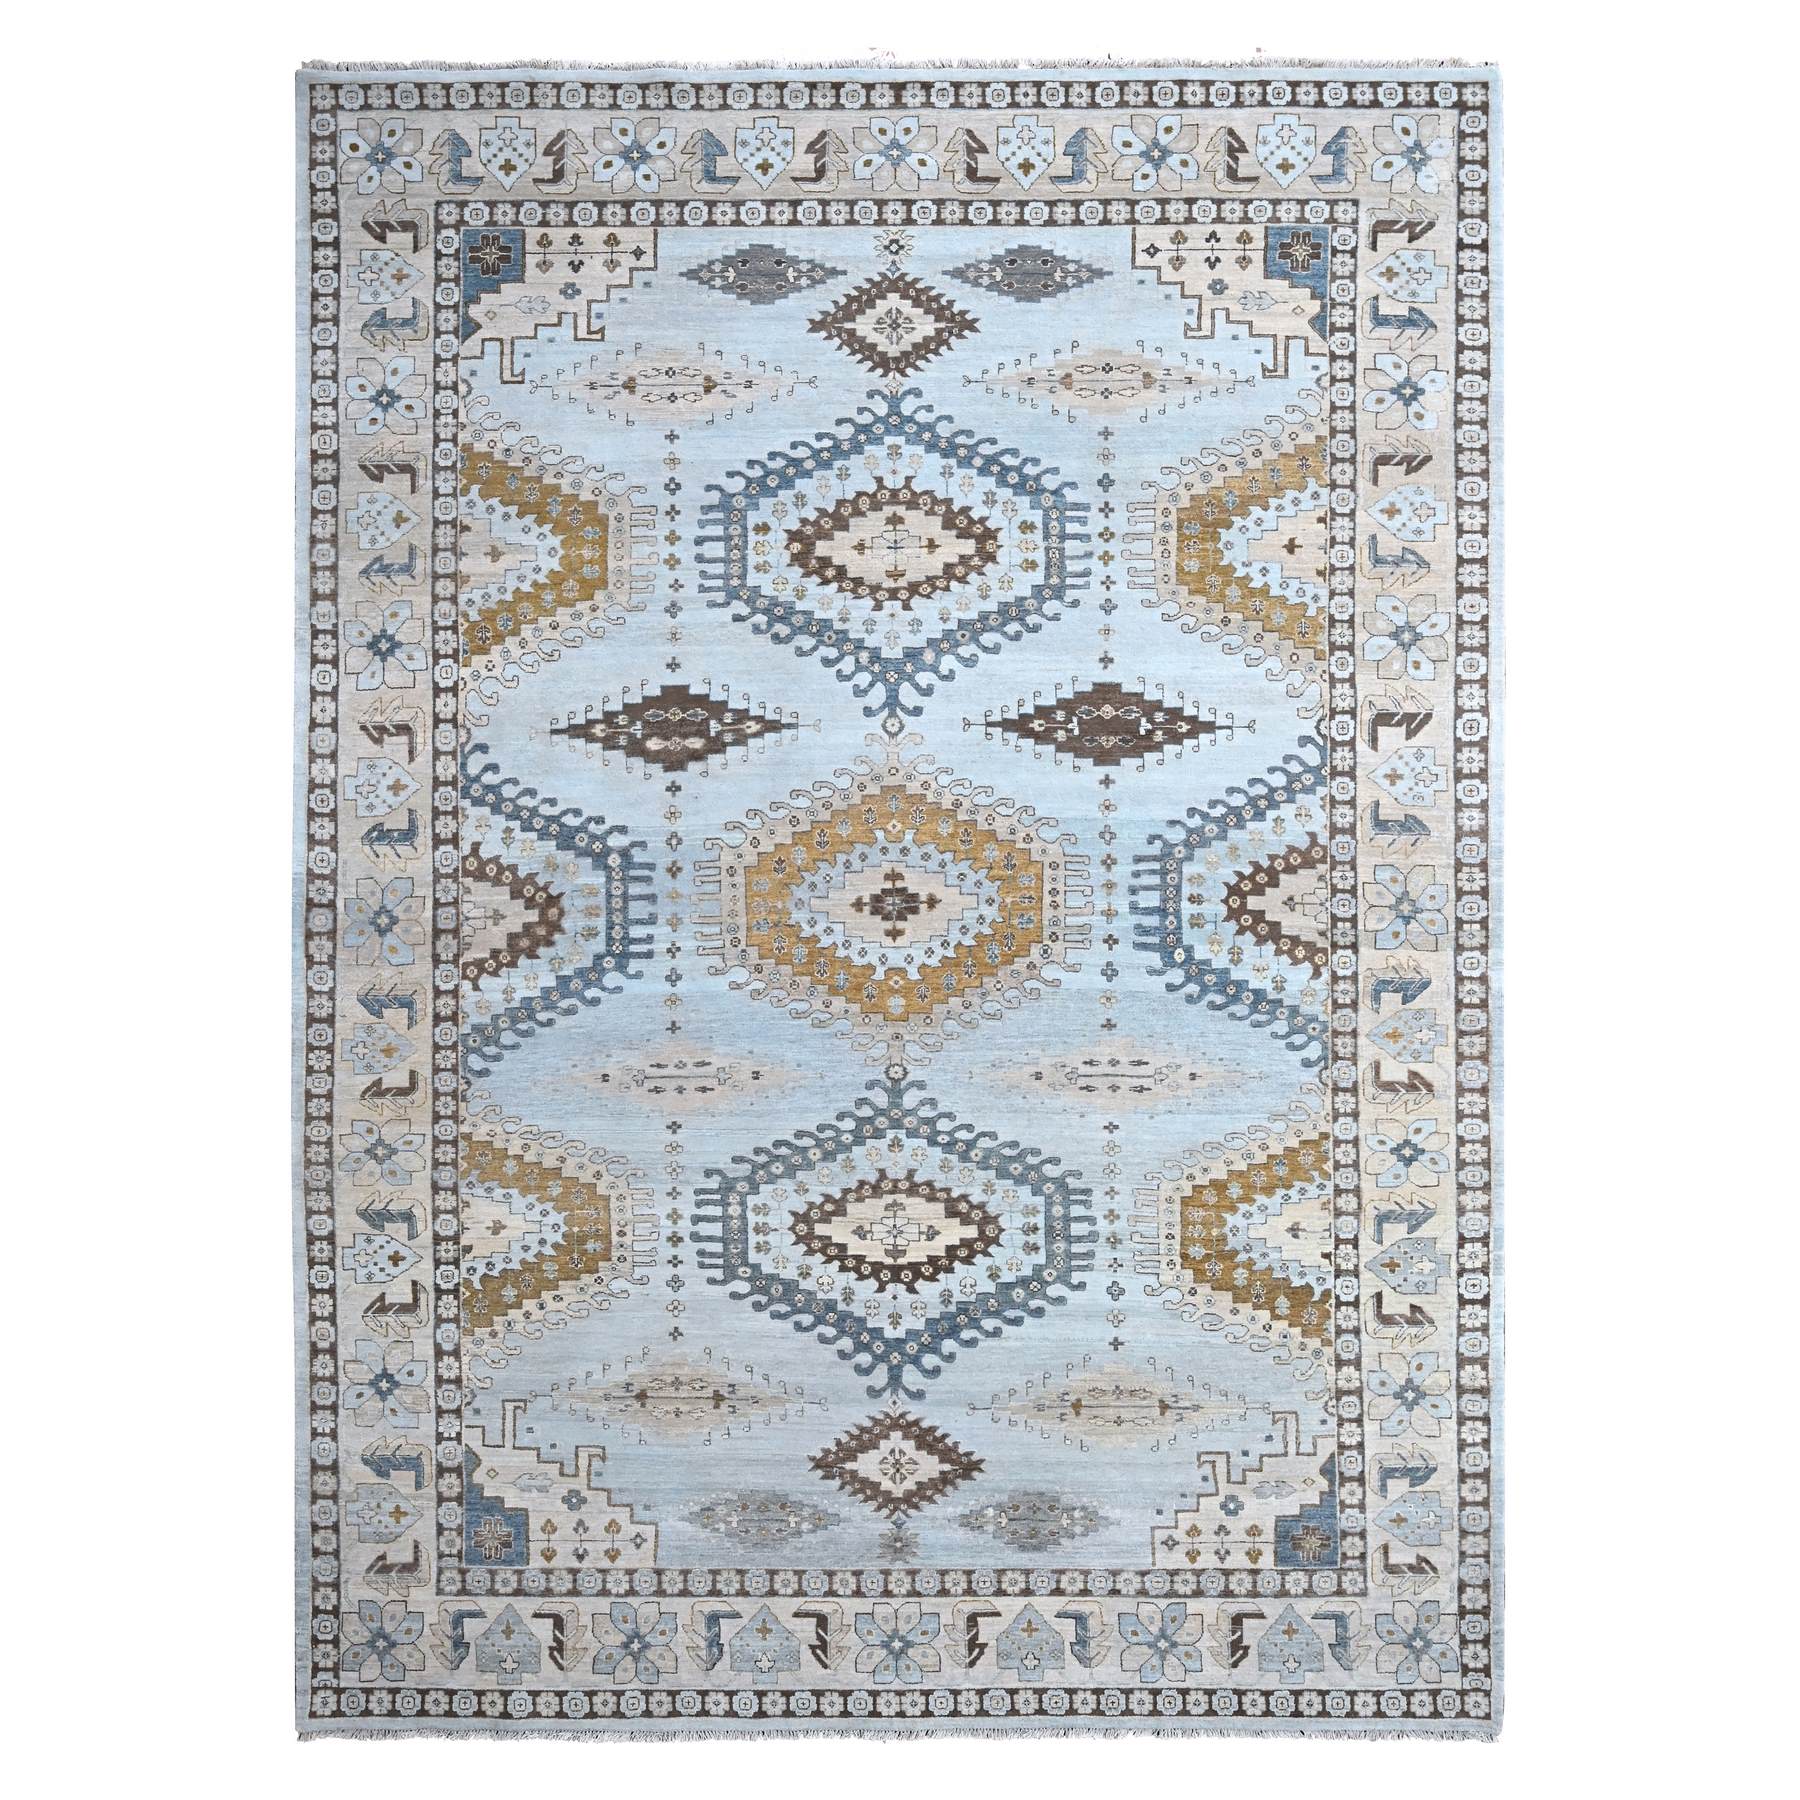 Lazy Gray, Densely Woven, Hand Knotted All Wool, Persian Village Inspired Geometric Design, Natural Dyes, Oriental Rug